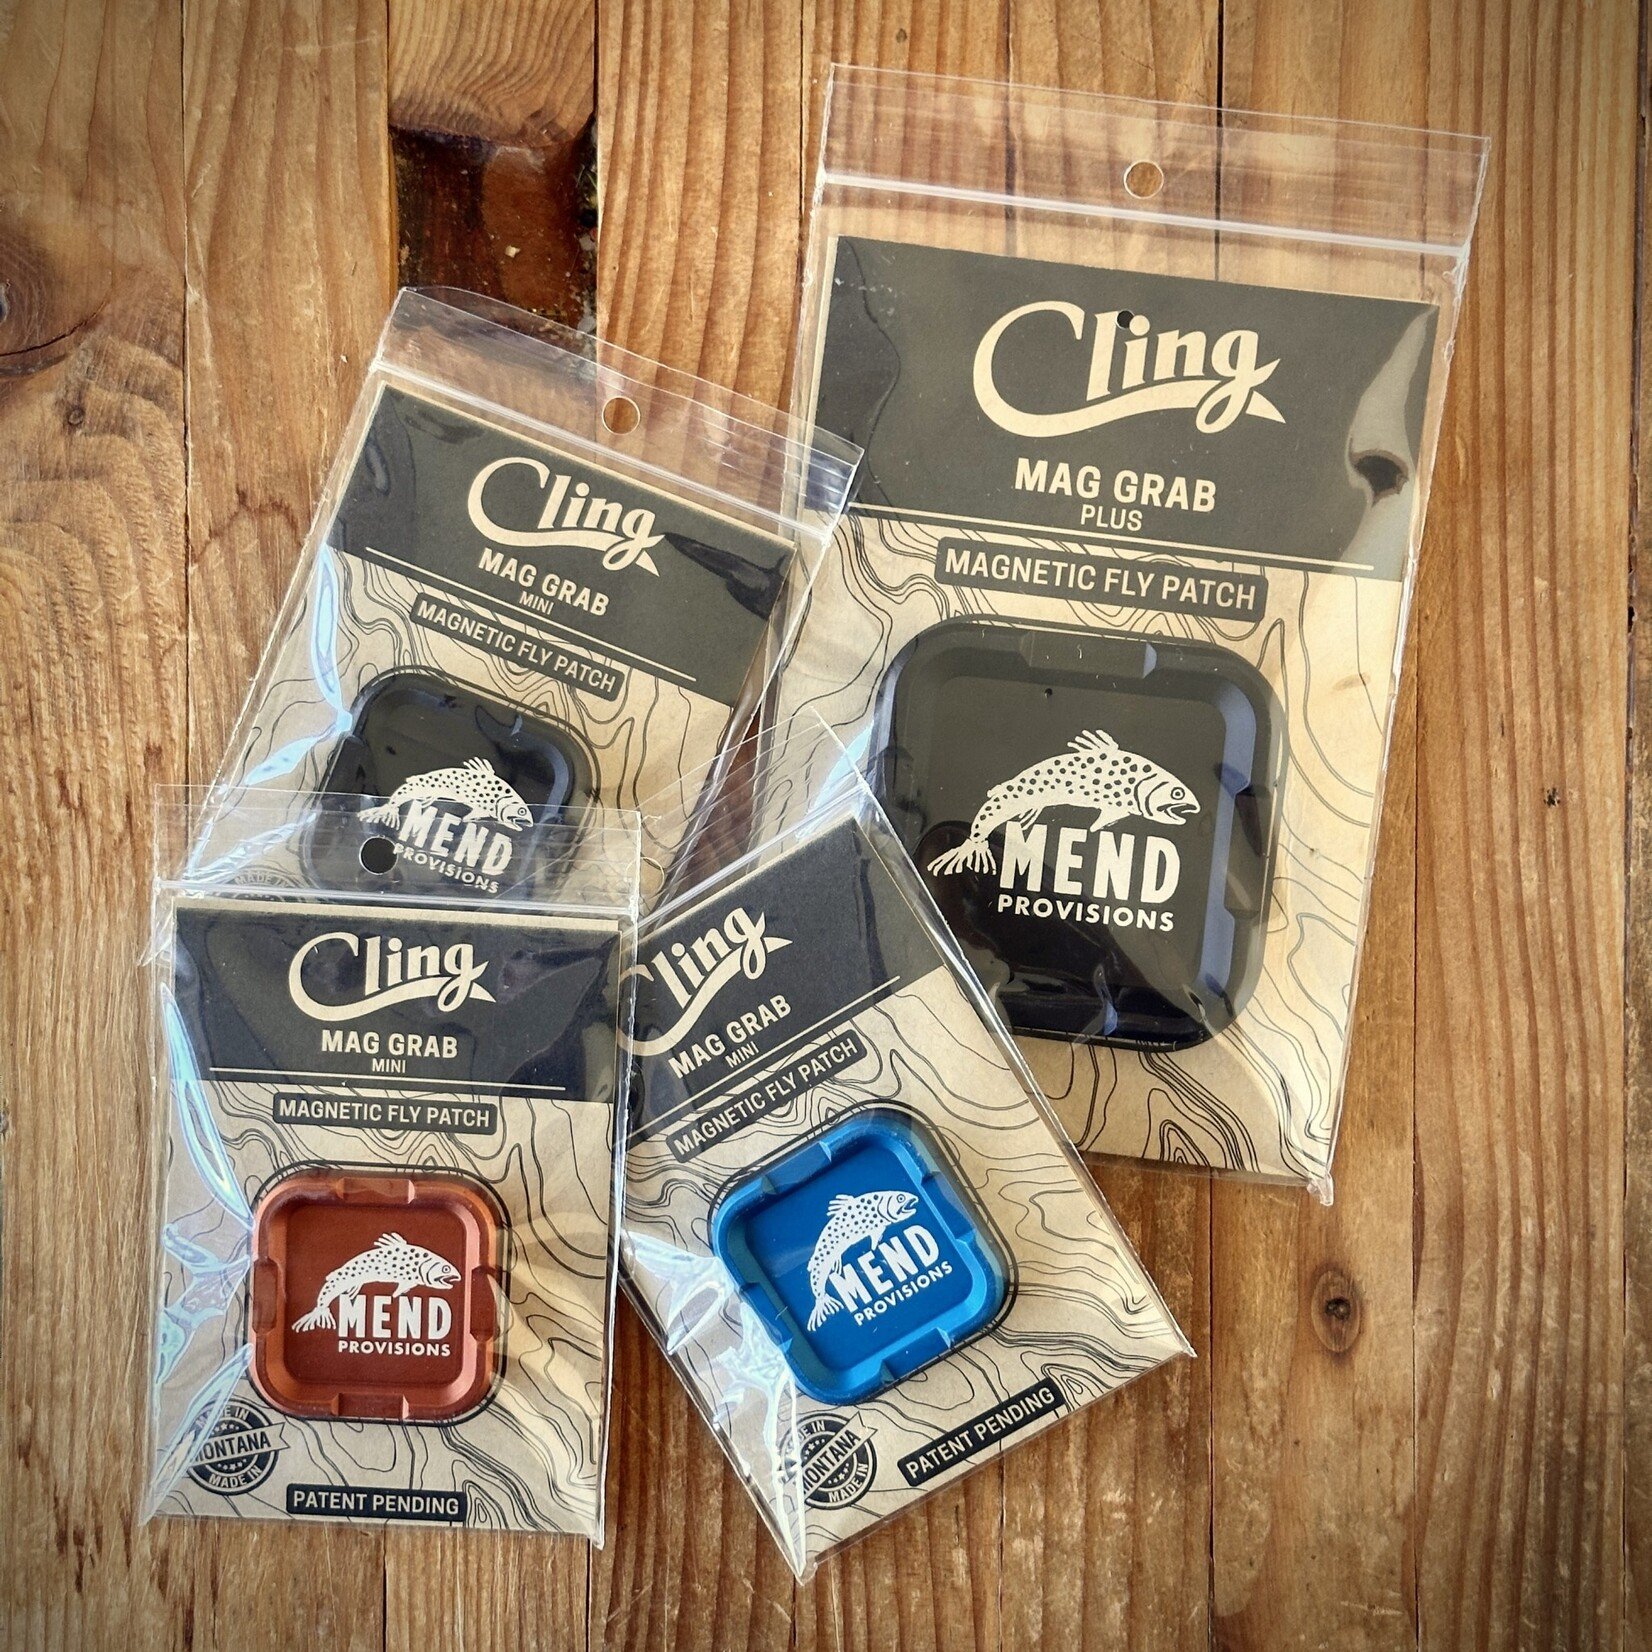 Cling MEND x CLING MAGNETIC FLY PATCH - MAG GRAB MINI